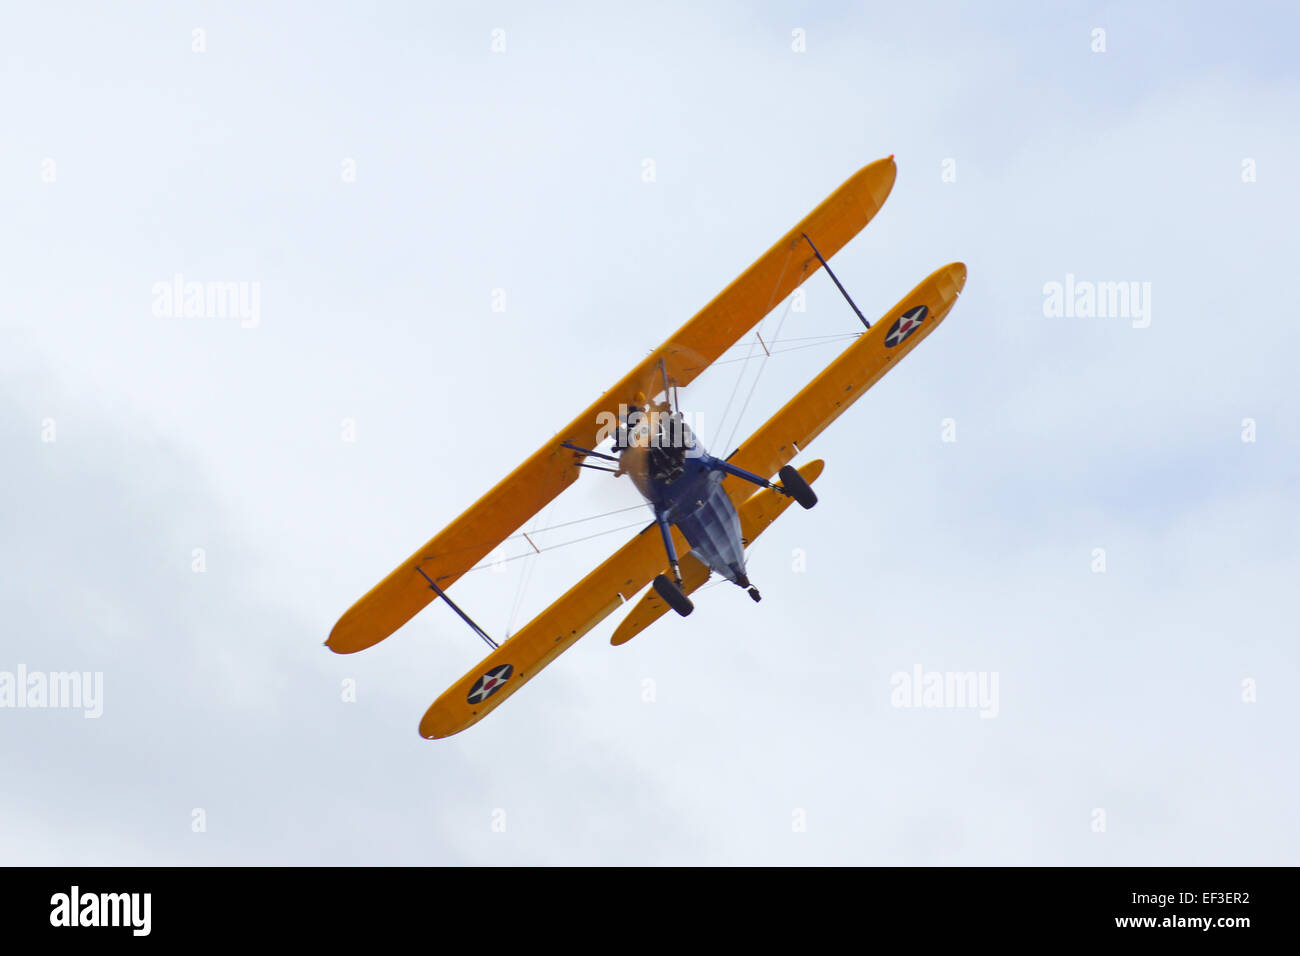 Airplane Bi-plane flying at 2015 Air show Stock Photo